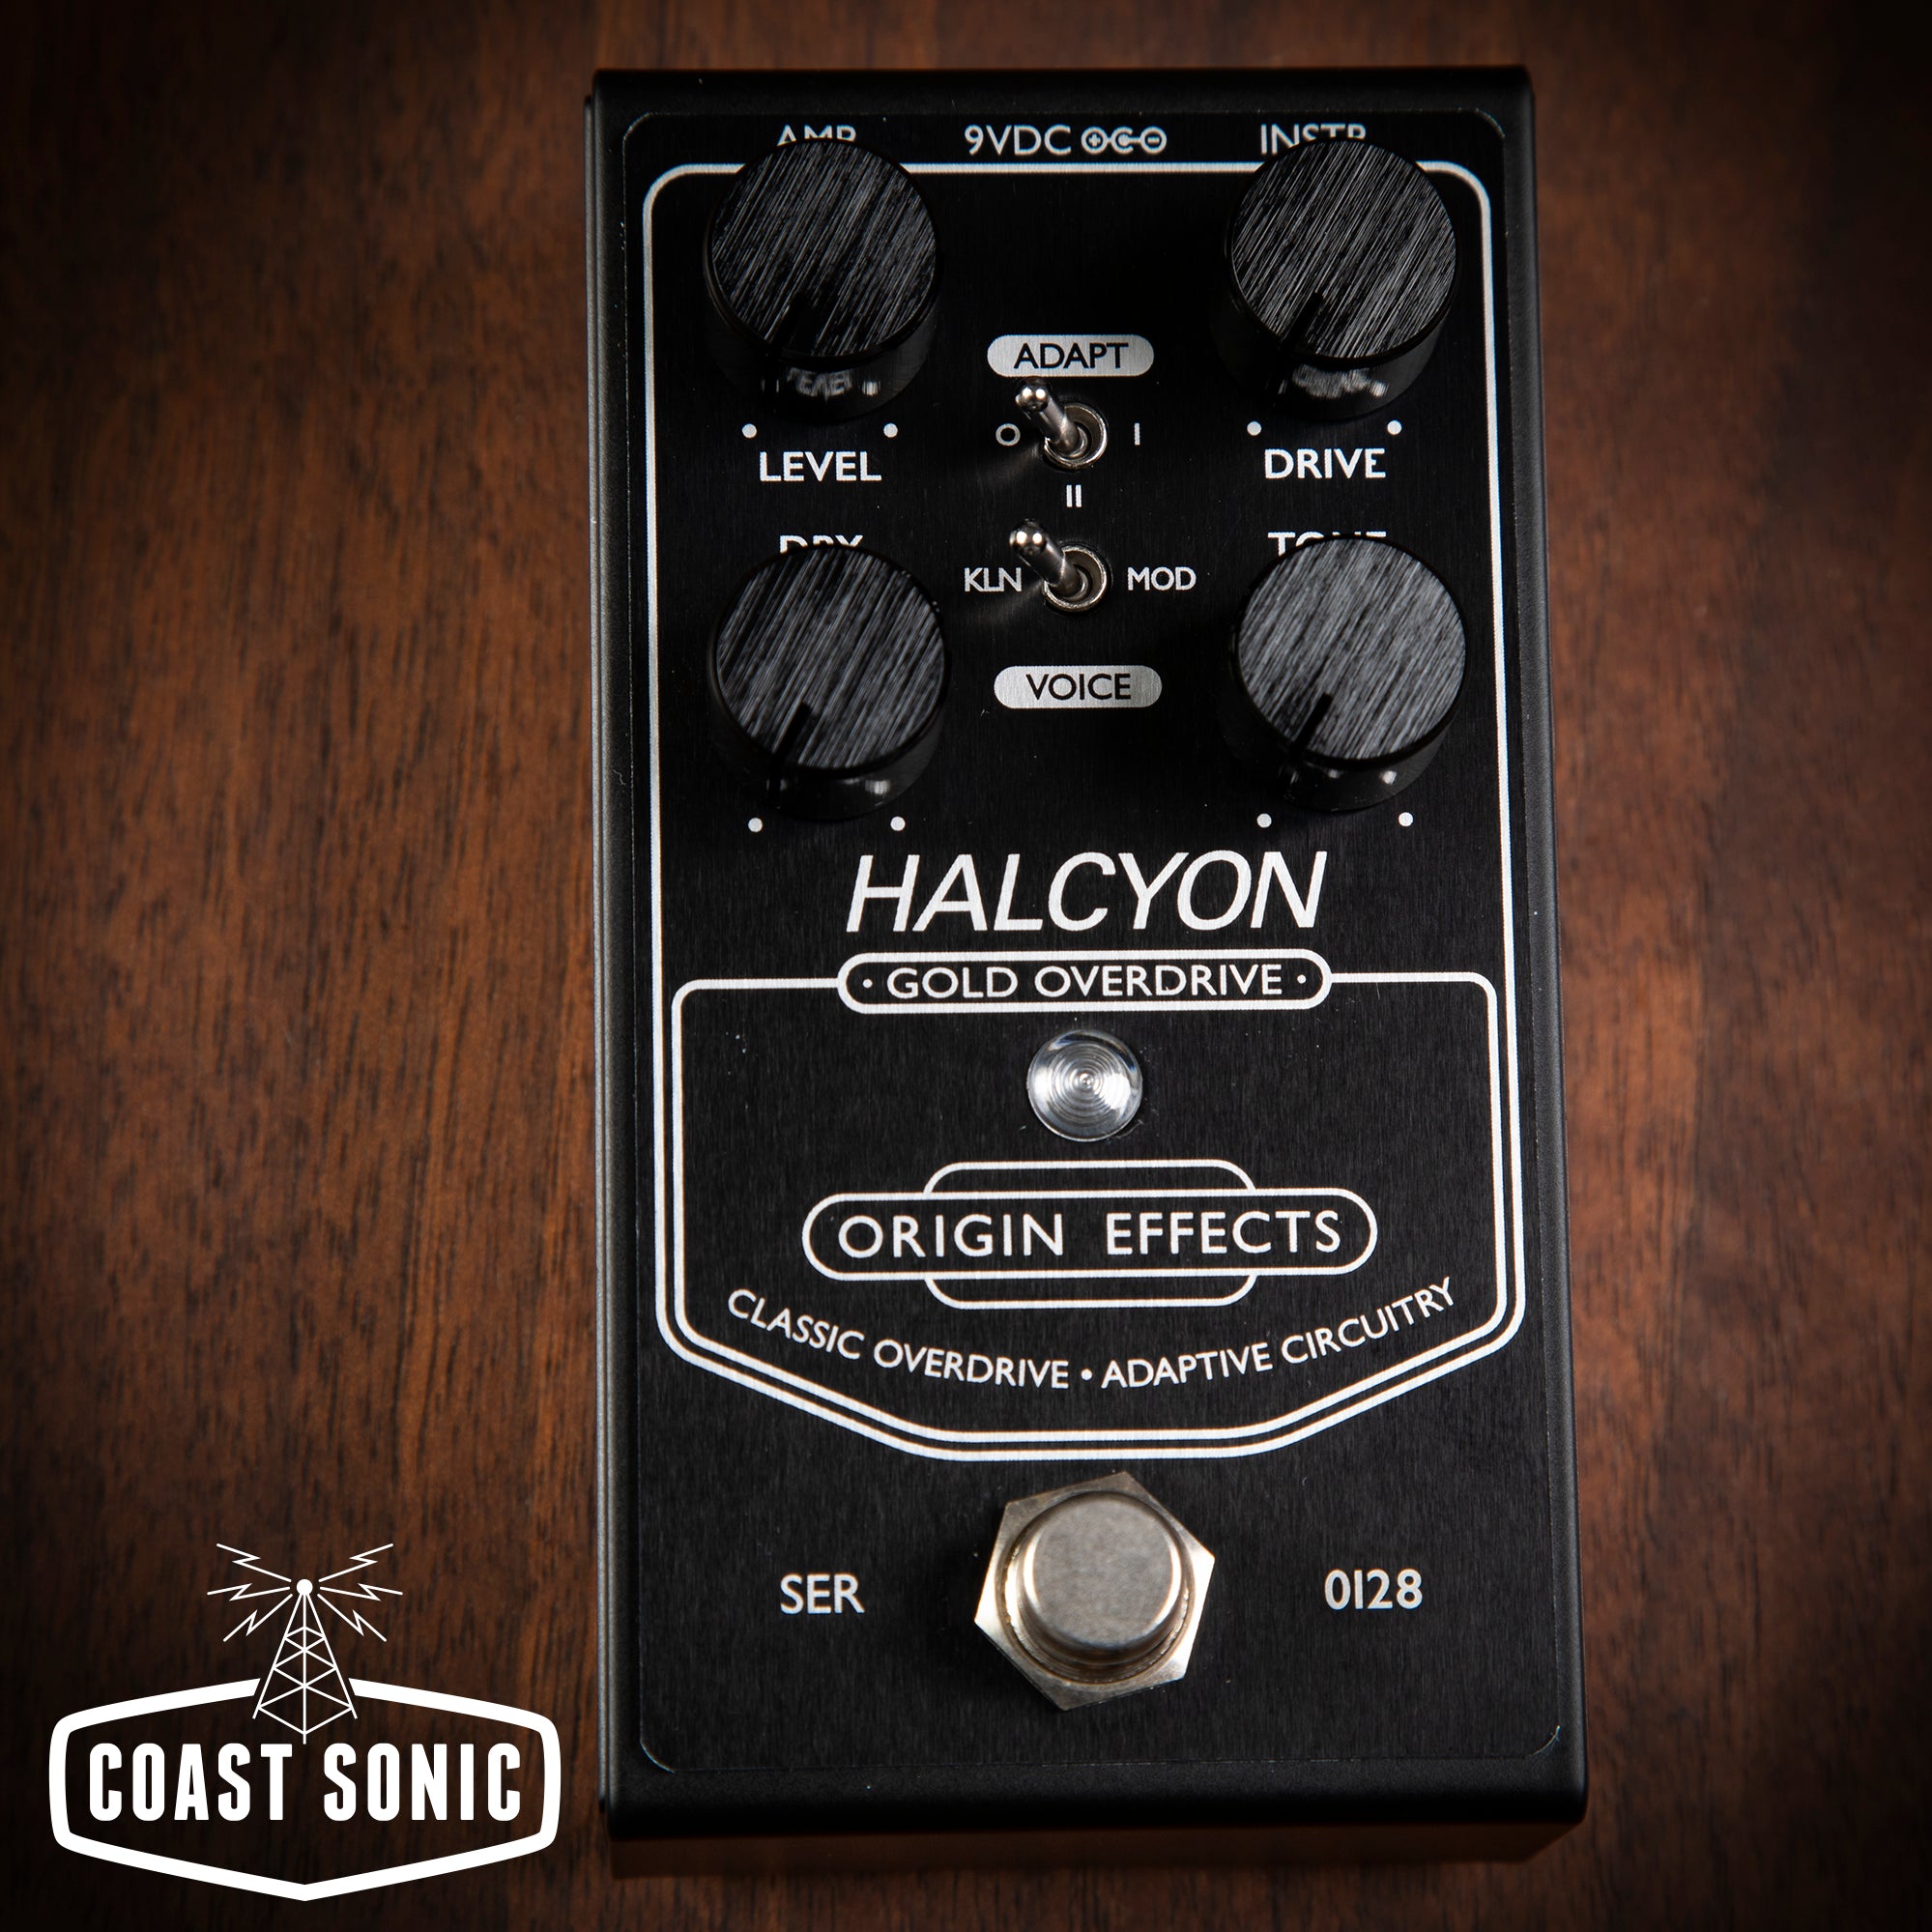 Origin Effects Halcyon Gold Overdrive *Limited Edition Black Series*